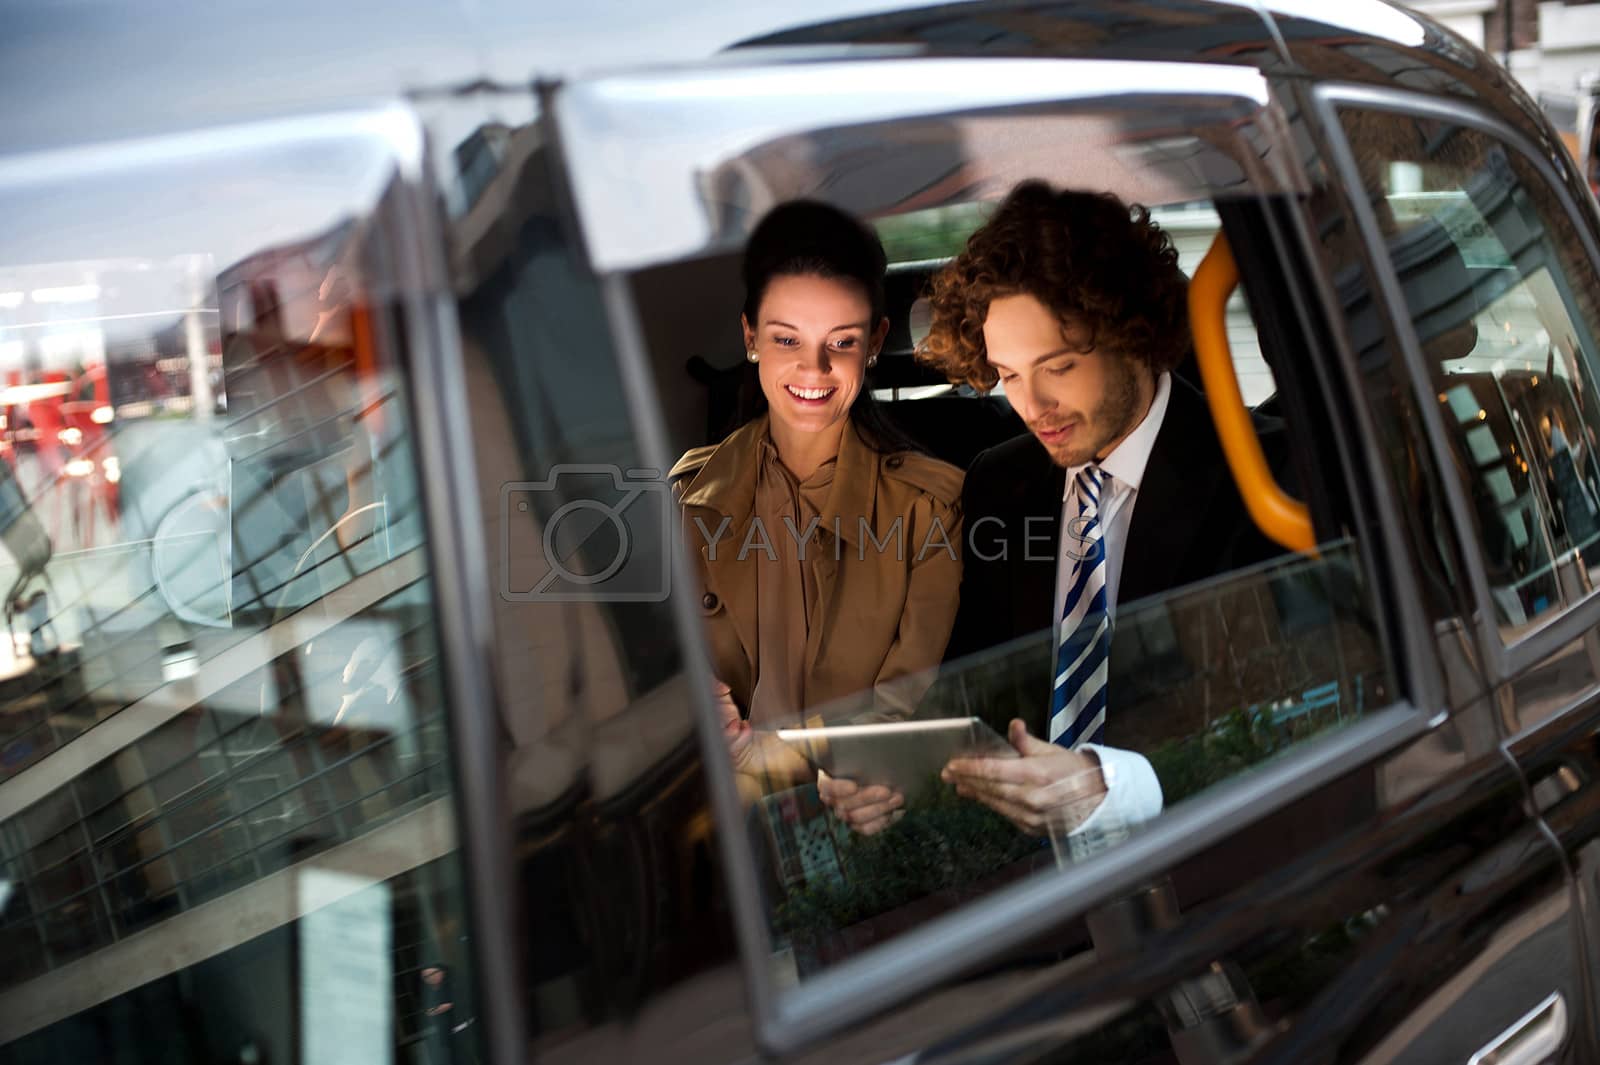 Royalty free image of Business people in taxi cab by stockyimages